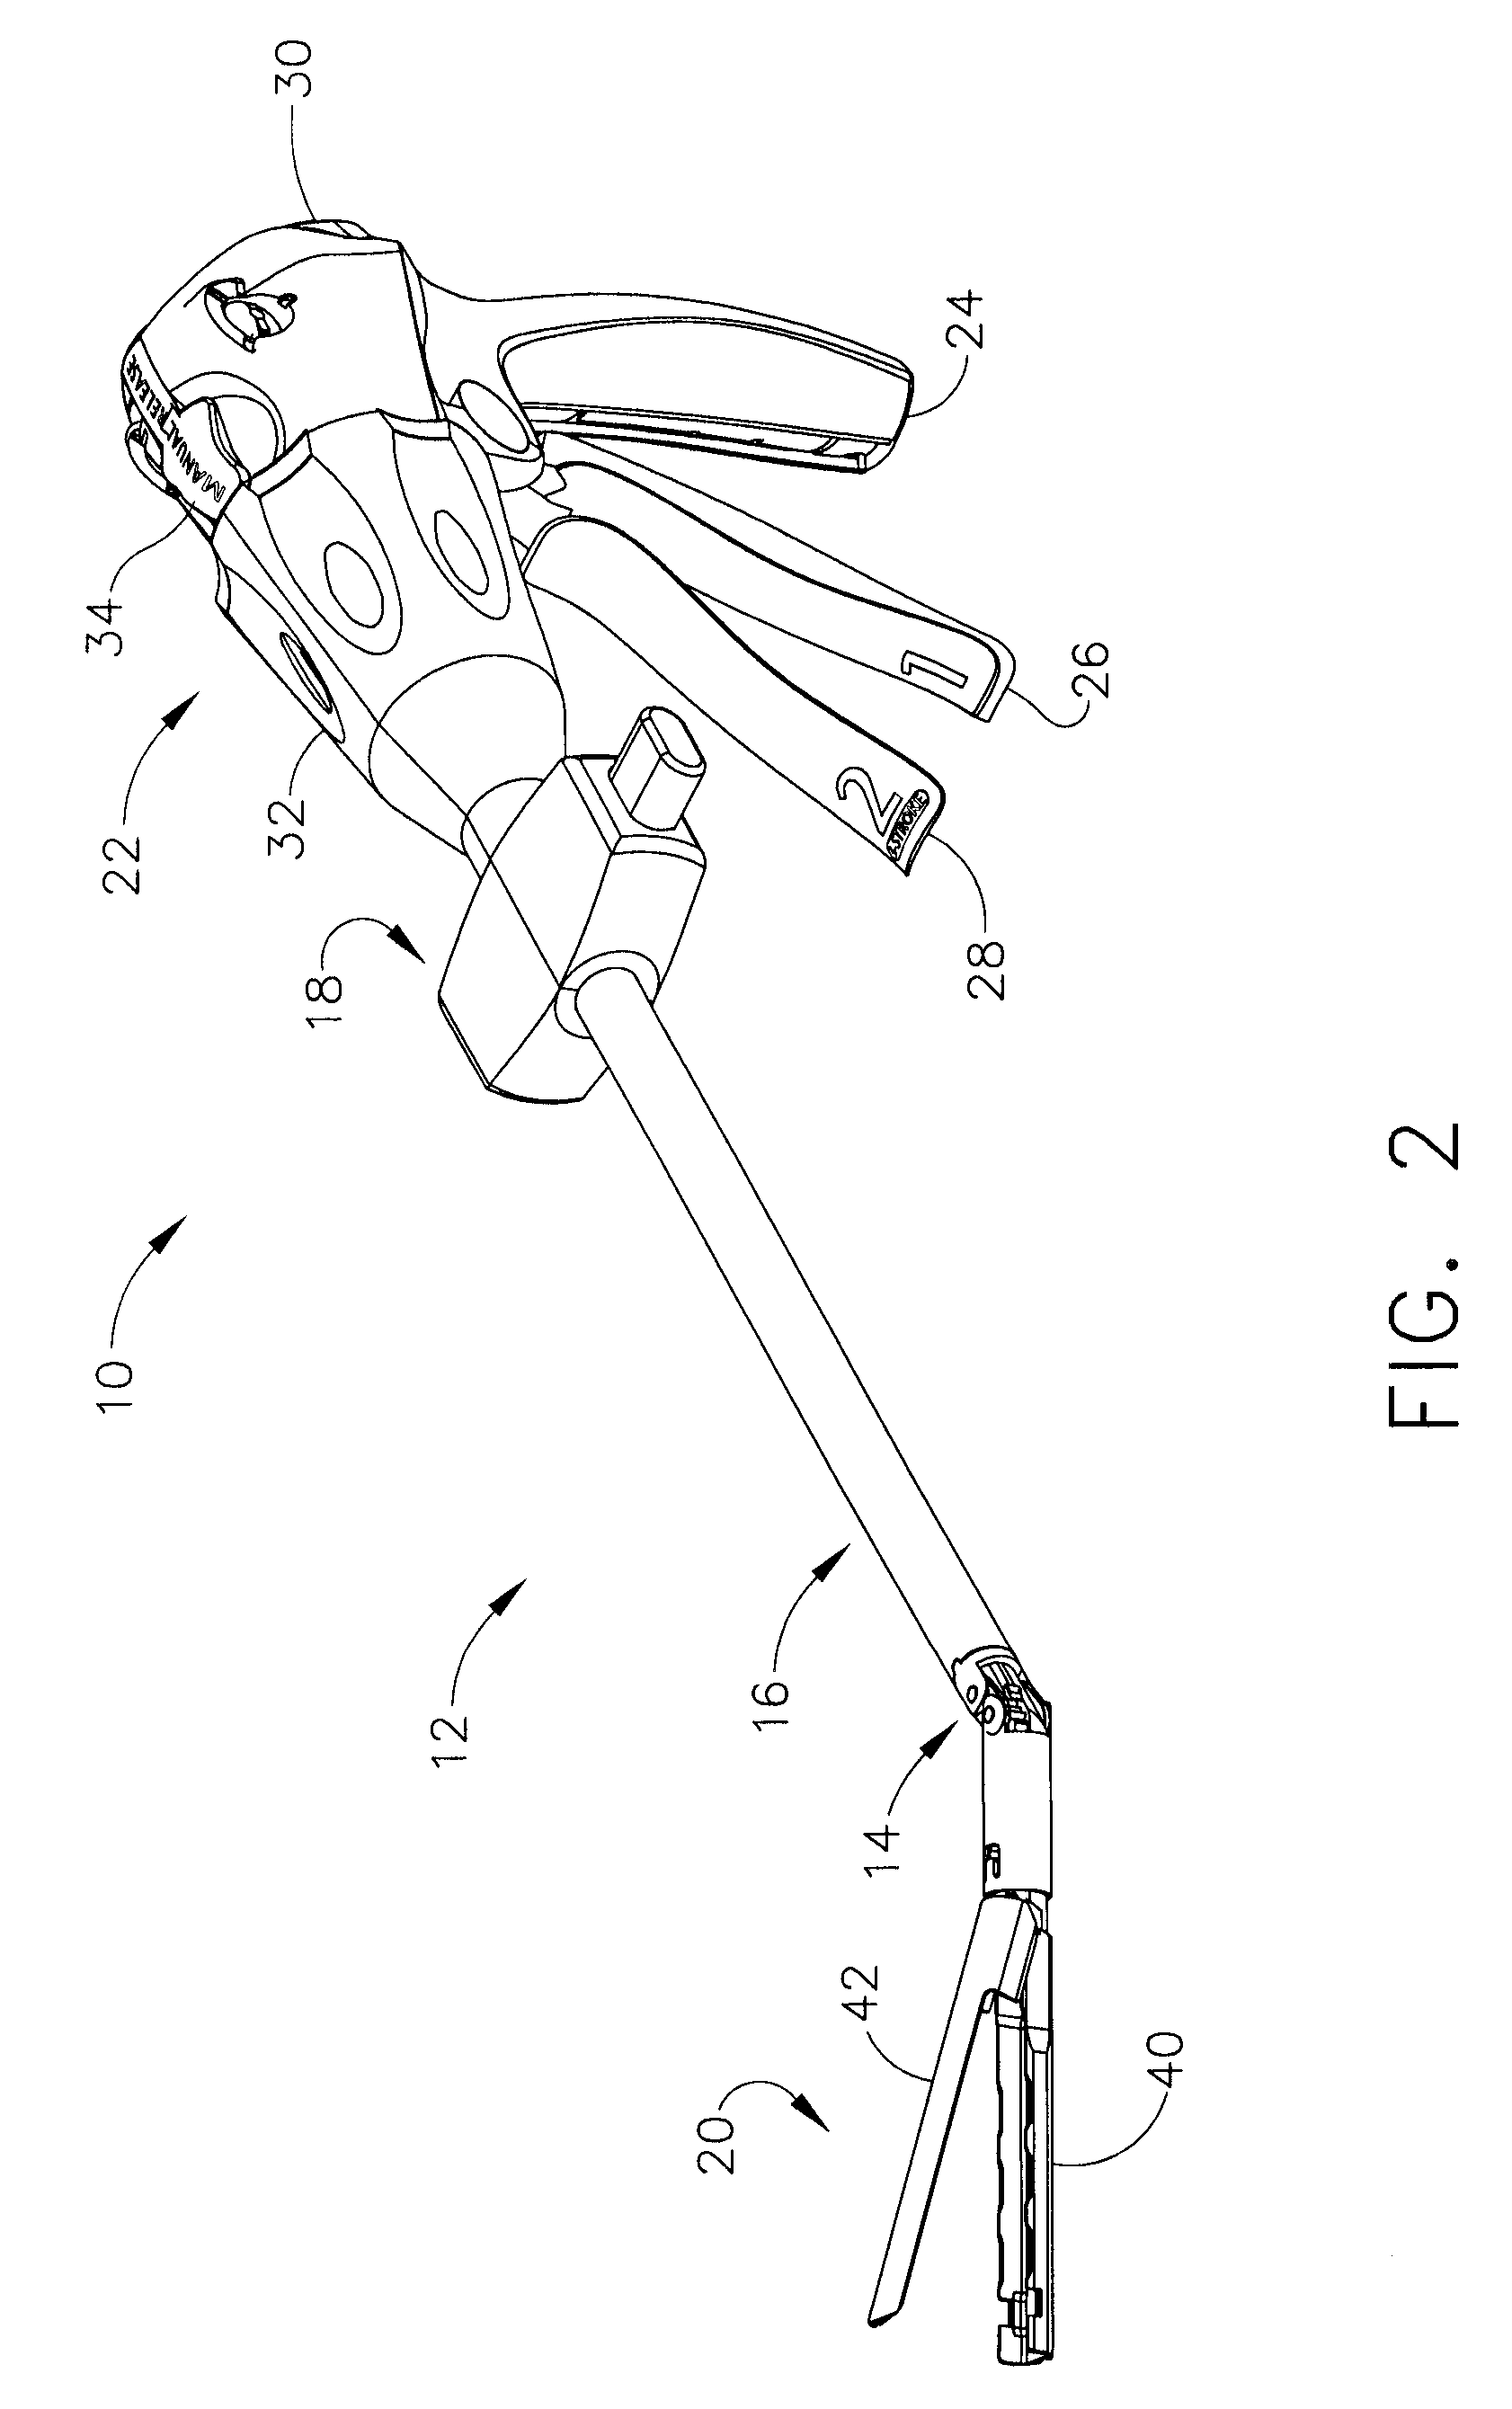 Surgical instrument with guided laterally moving articulation member